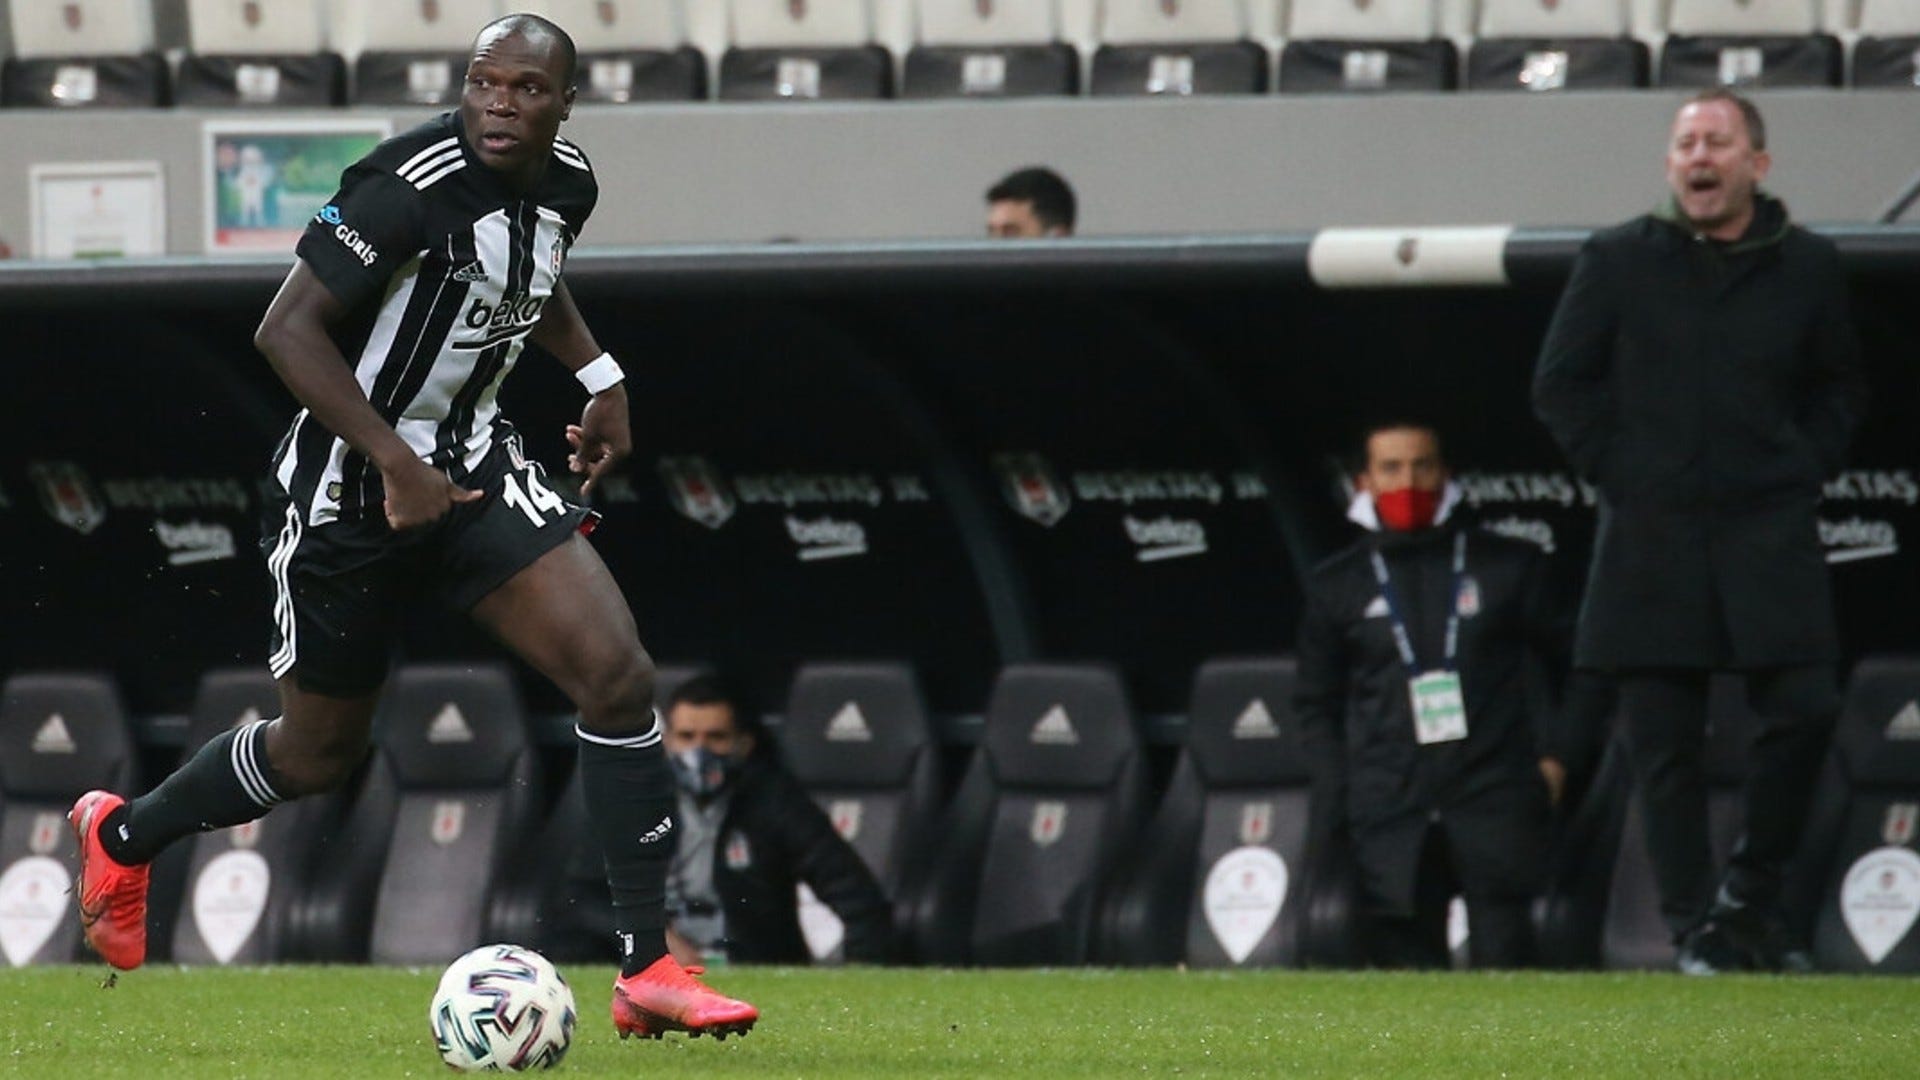 Beşiktaş comes from behind to win derby - Turkish News